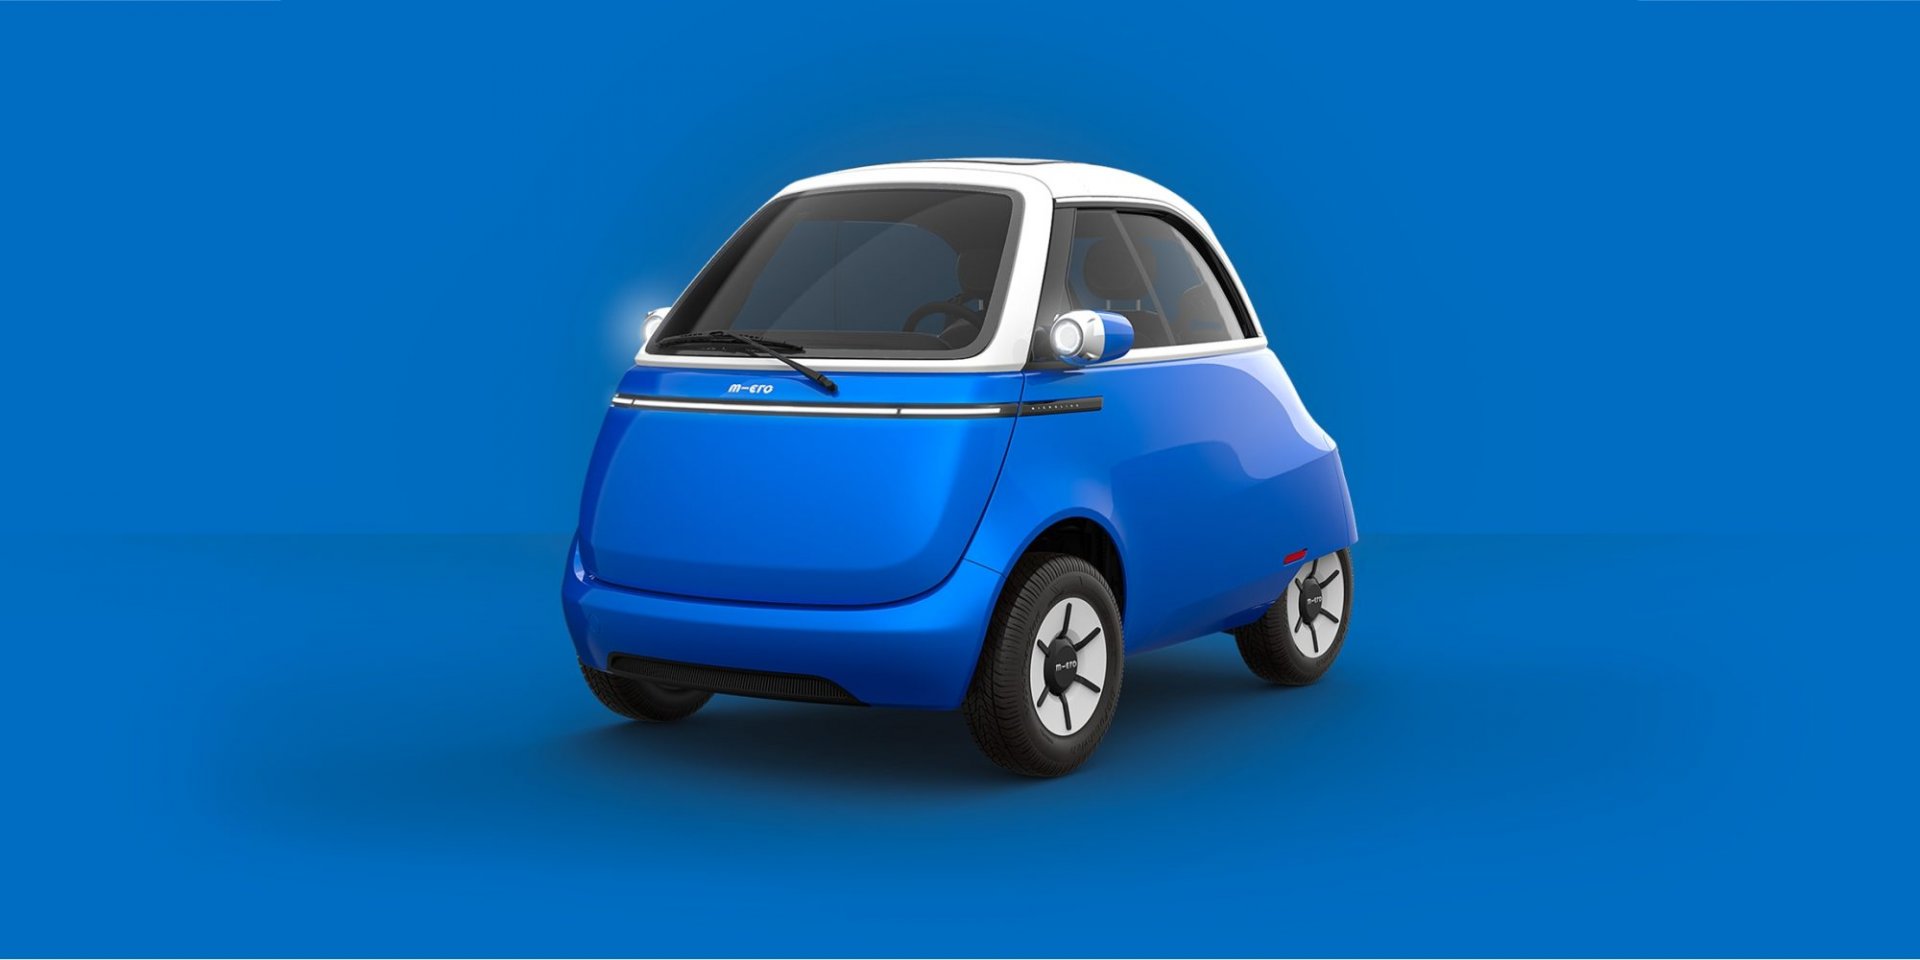 Micro shows off production line for its adorable electric microcars, first units coming in March